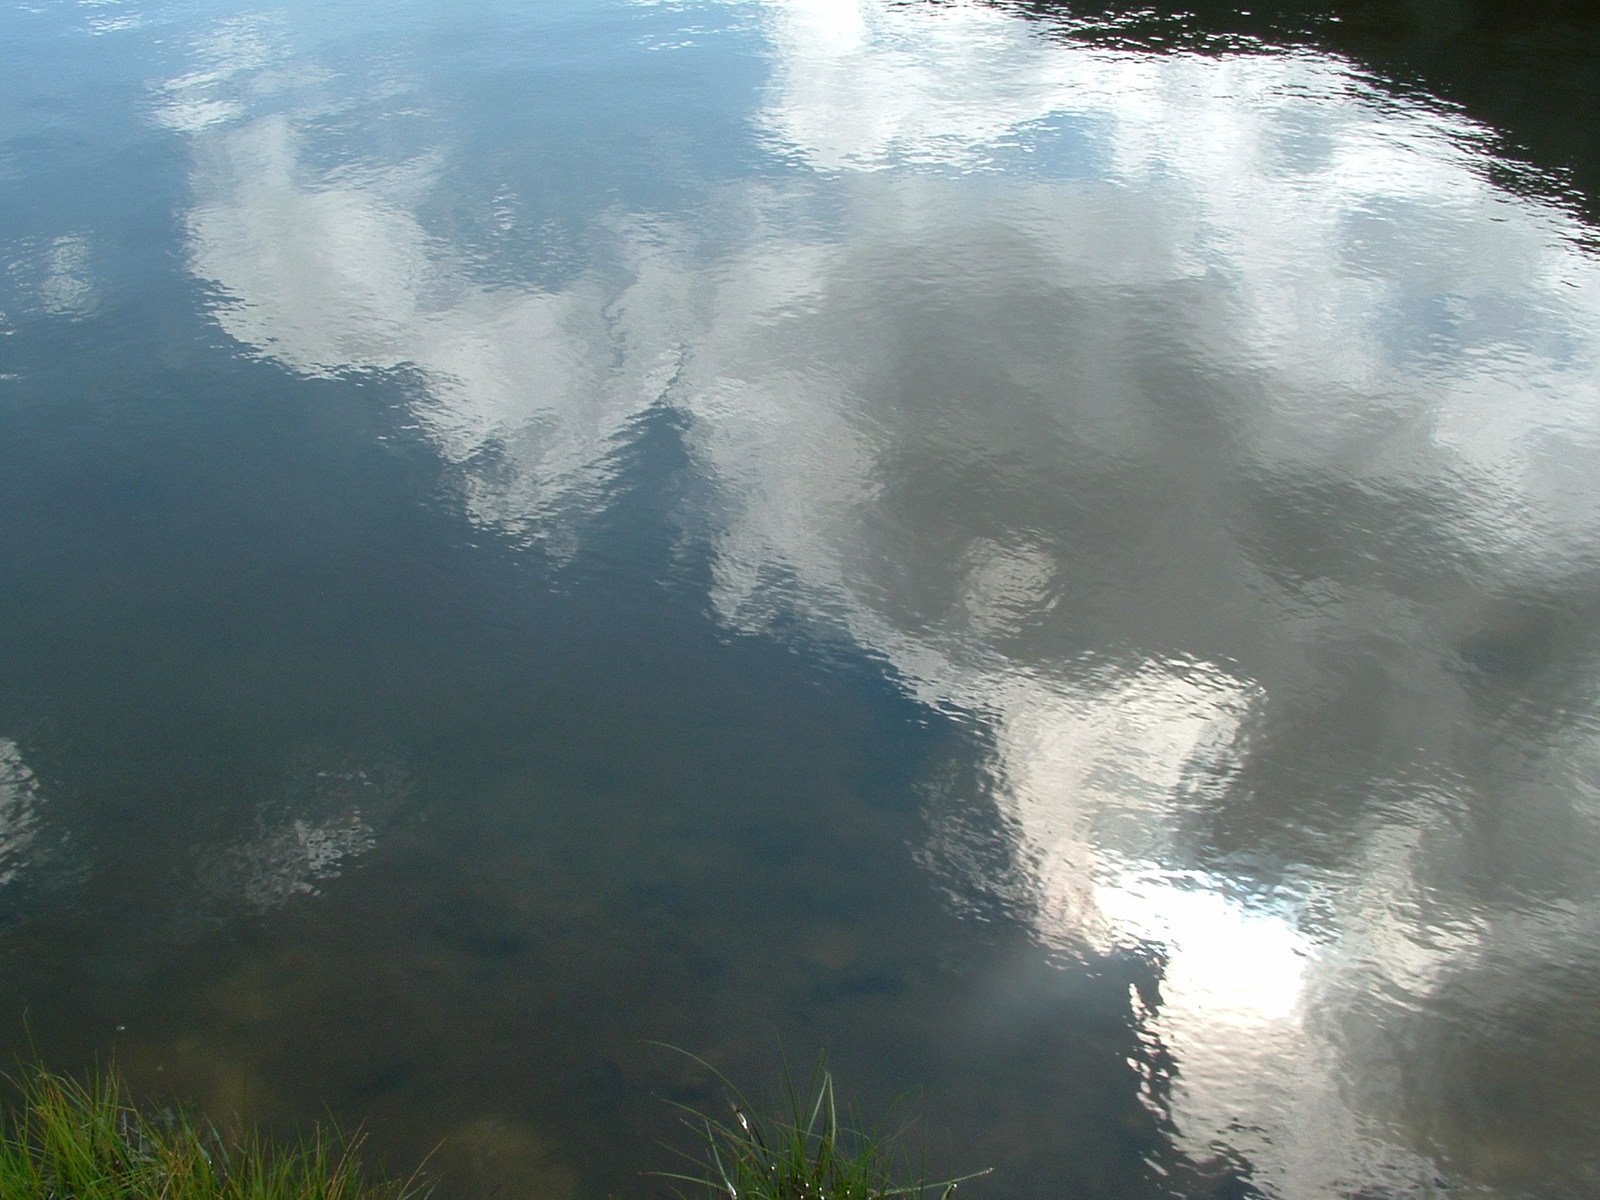 water and sky reflecting off the surface of a body of water